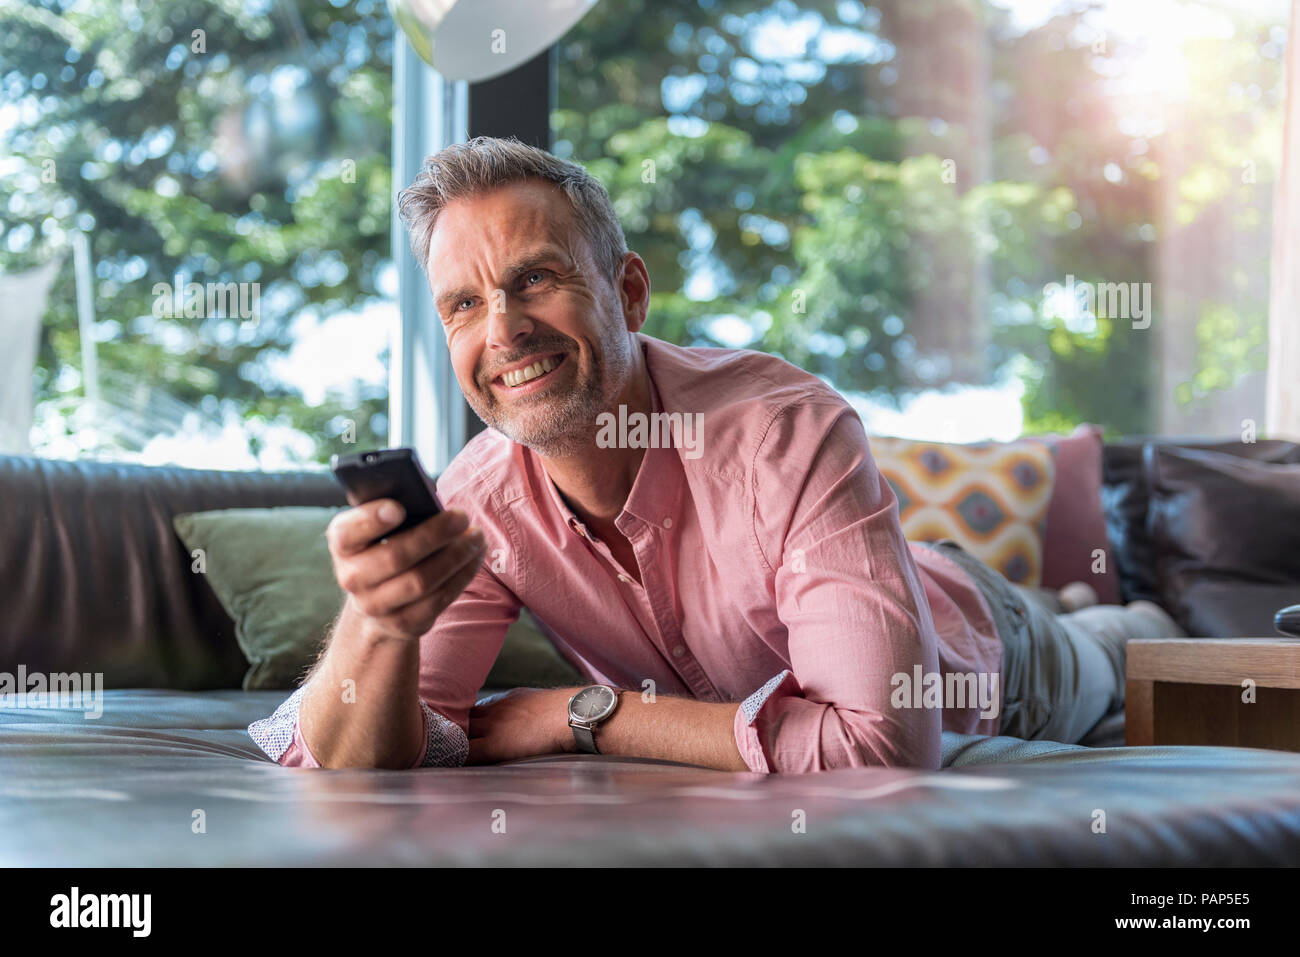 Smiling mature man lying on couch at home using remote control Stock Photo